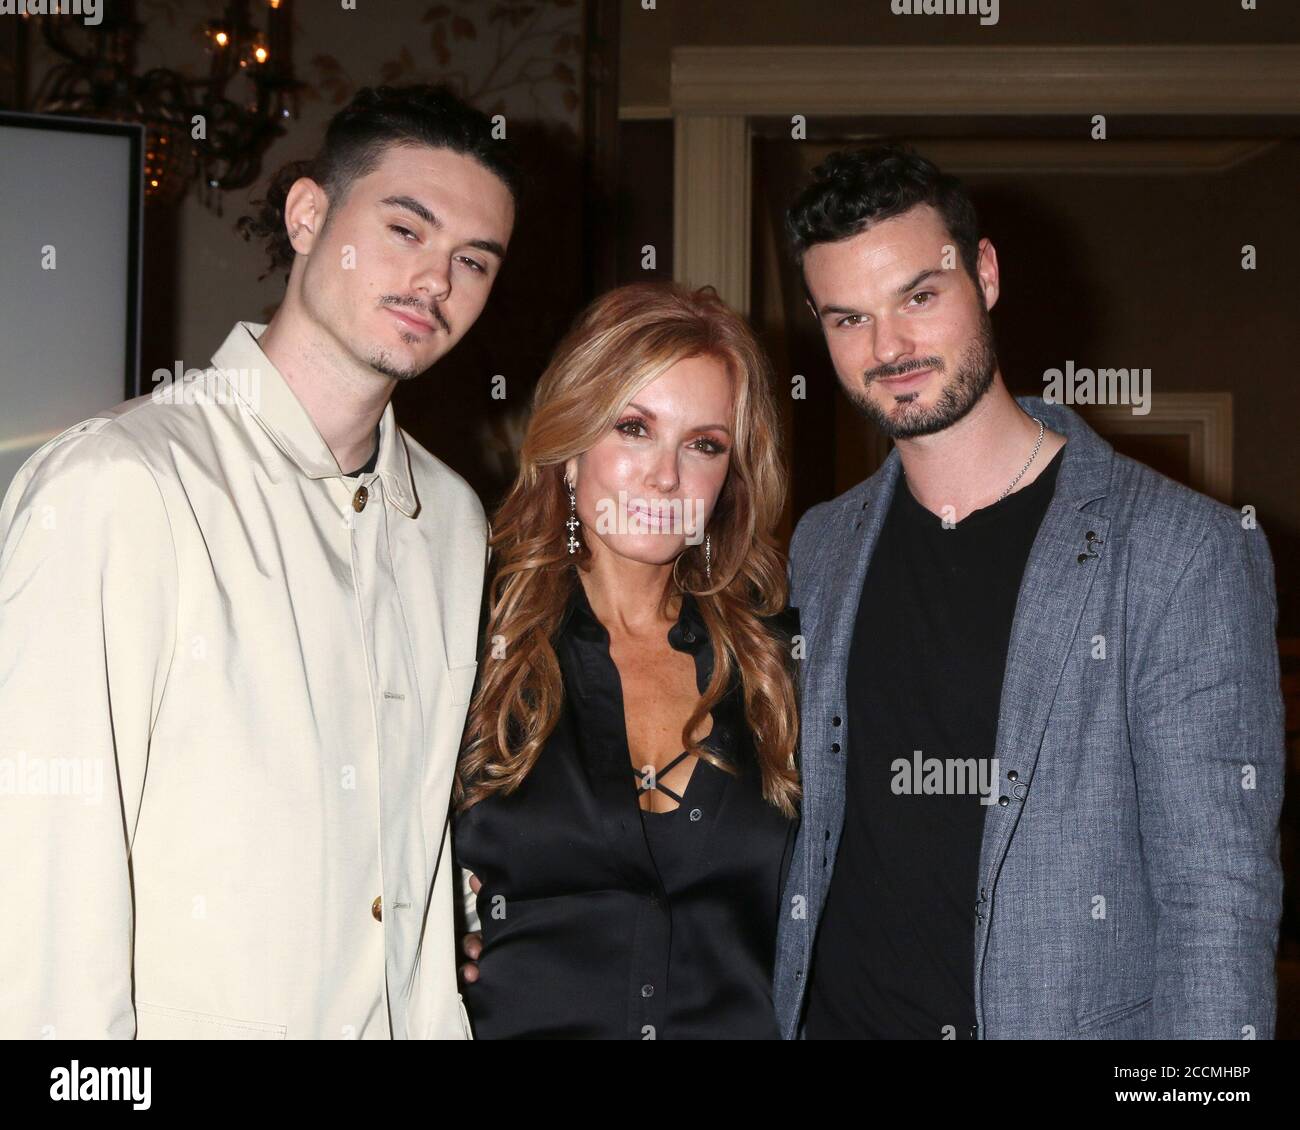 LOS ANGELES - FEB 2:  Landon Recht, Tracey Bregman, Austin Recht at the Tracey Bregman 35th Anniversary on the Young and the Restless at CBS TV City on February 2, 2018 in Los Angeles, CA Stock Photo